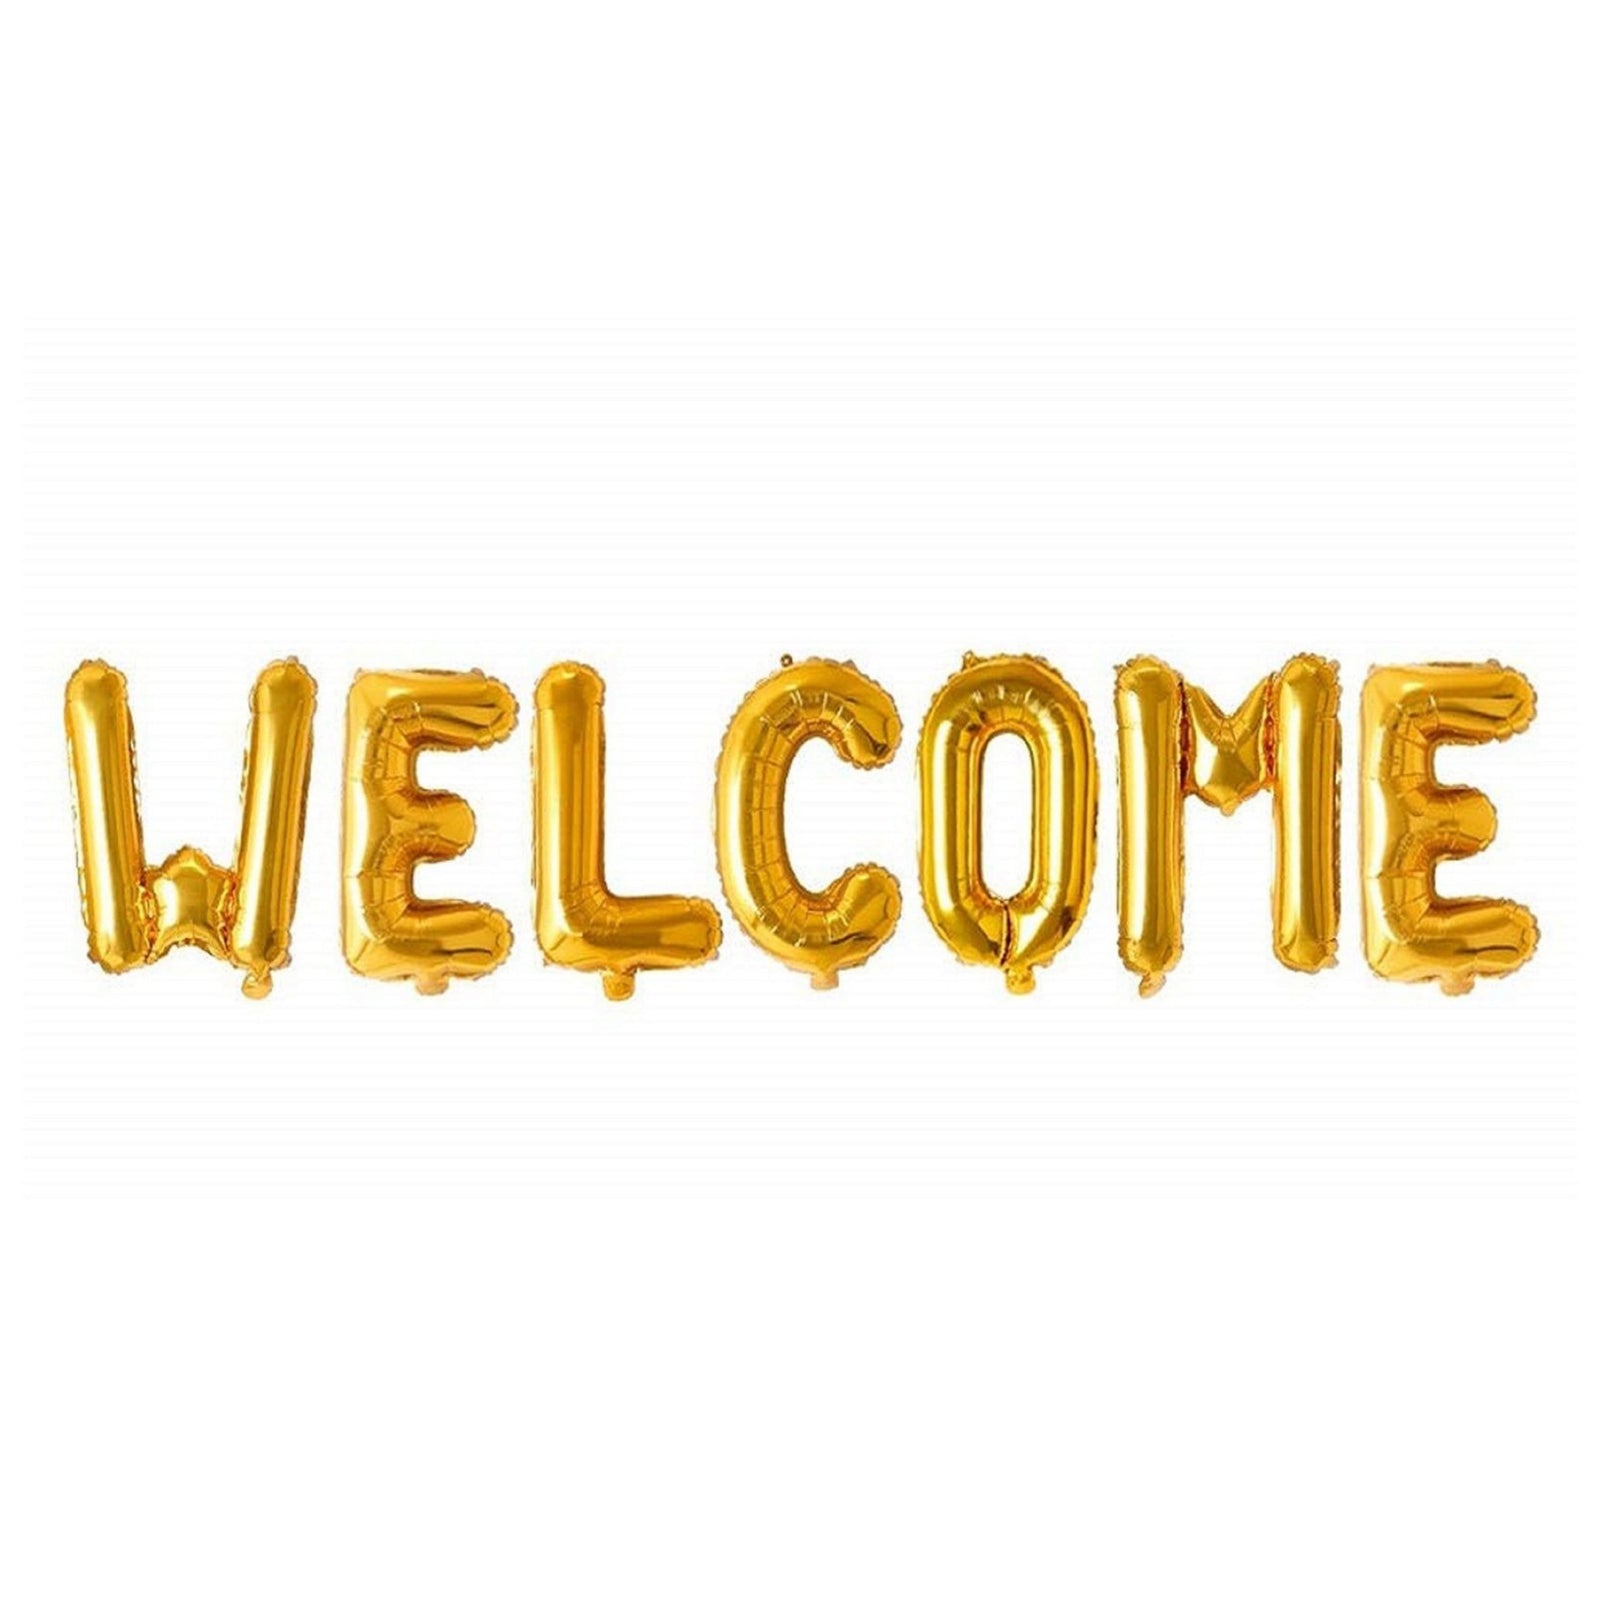 Welcome Letter Foil Balloon/ Anniversary Party Decoration Items - Golden